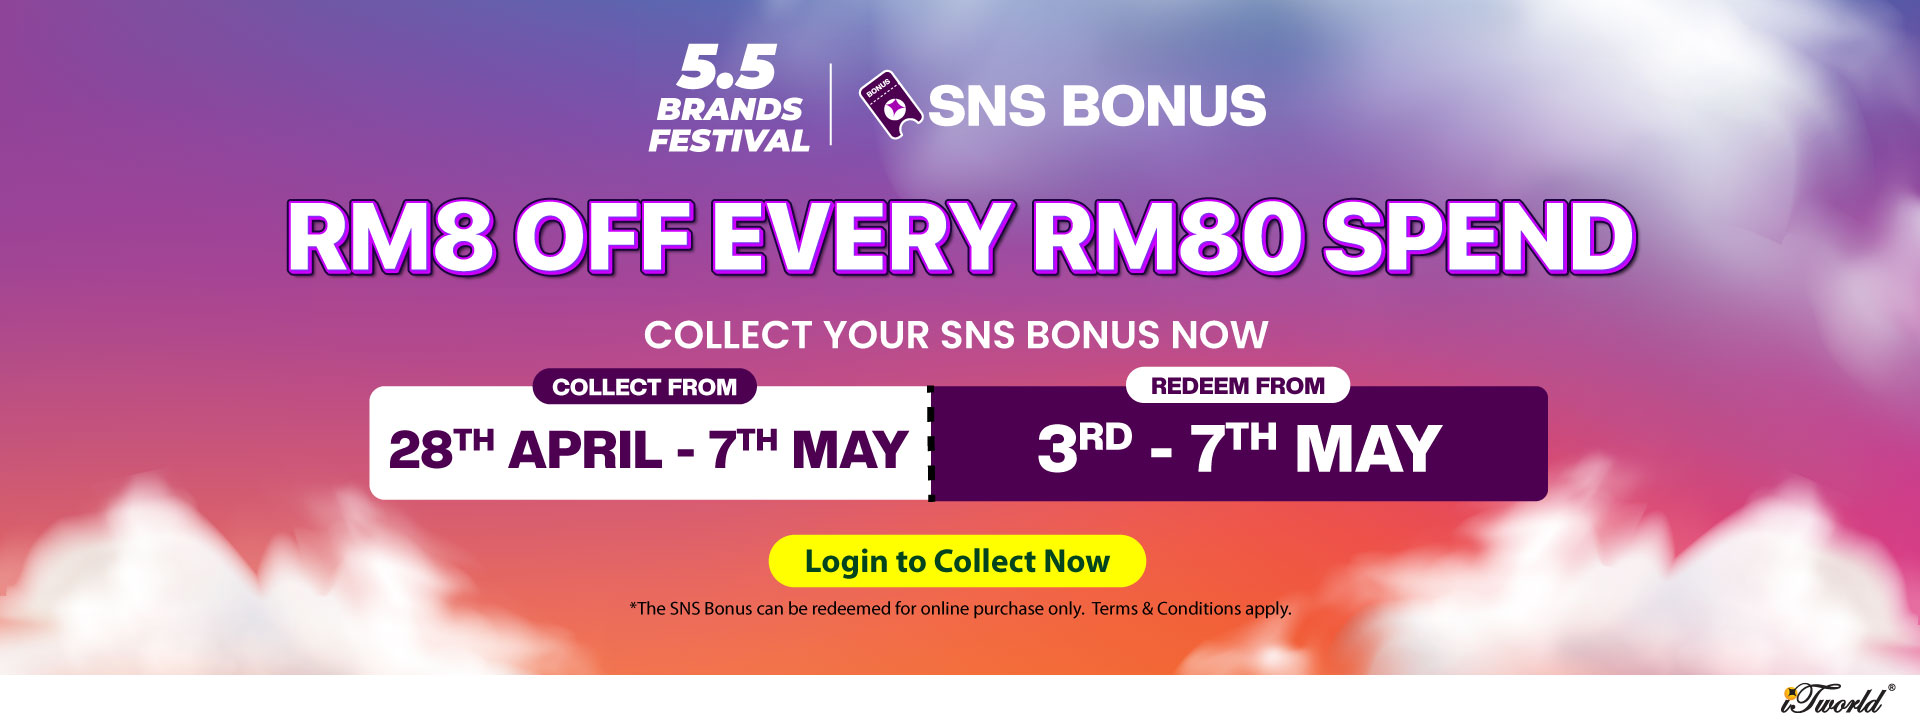 Collect SNS Bonus and save more on 5.5 Brands Festival